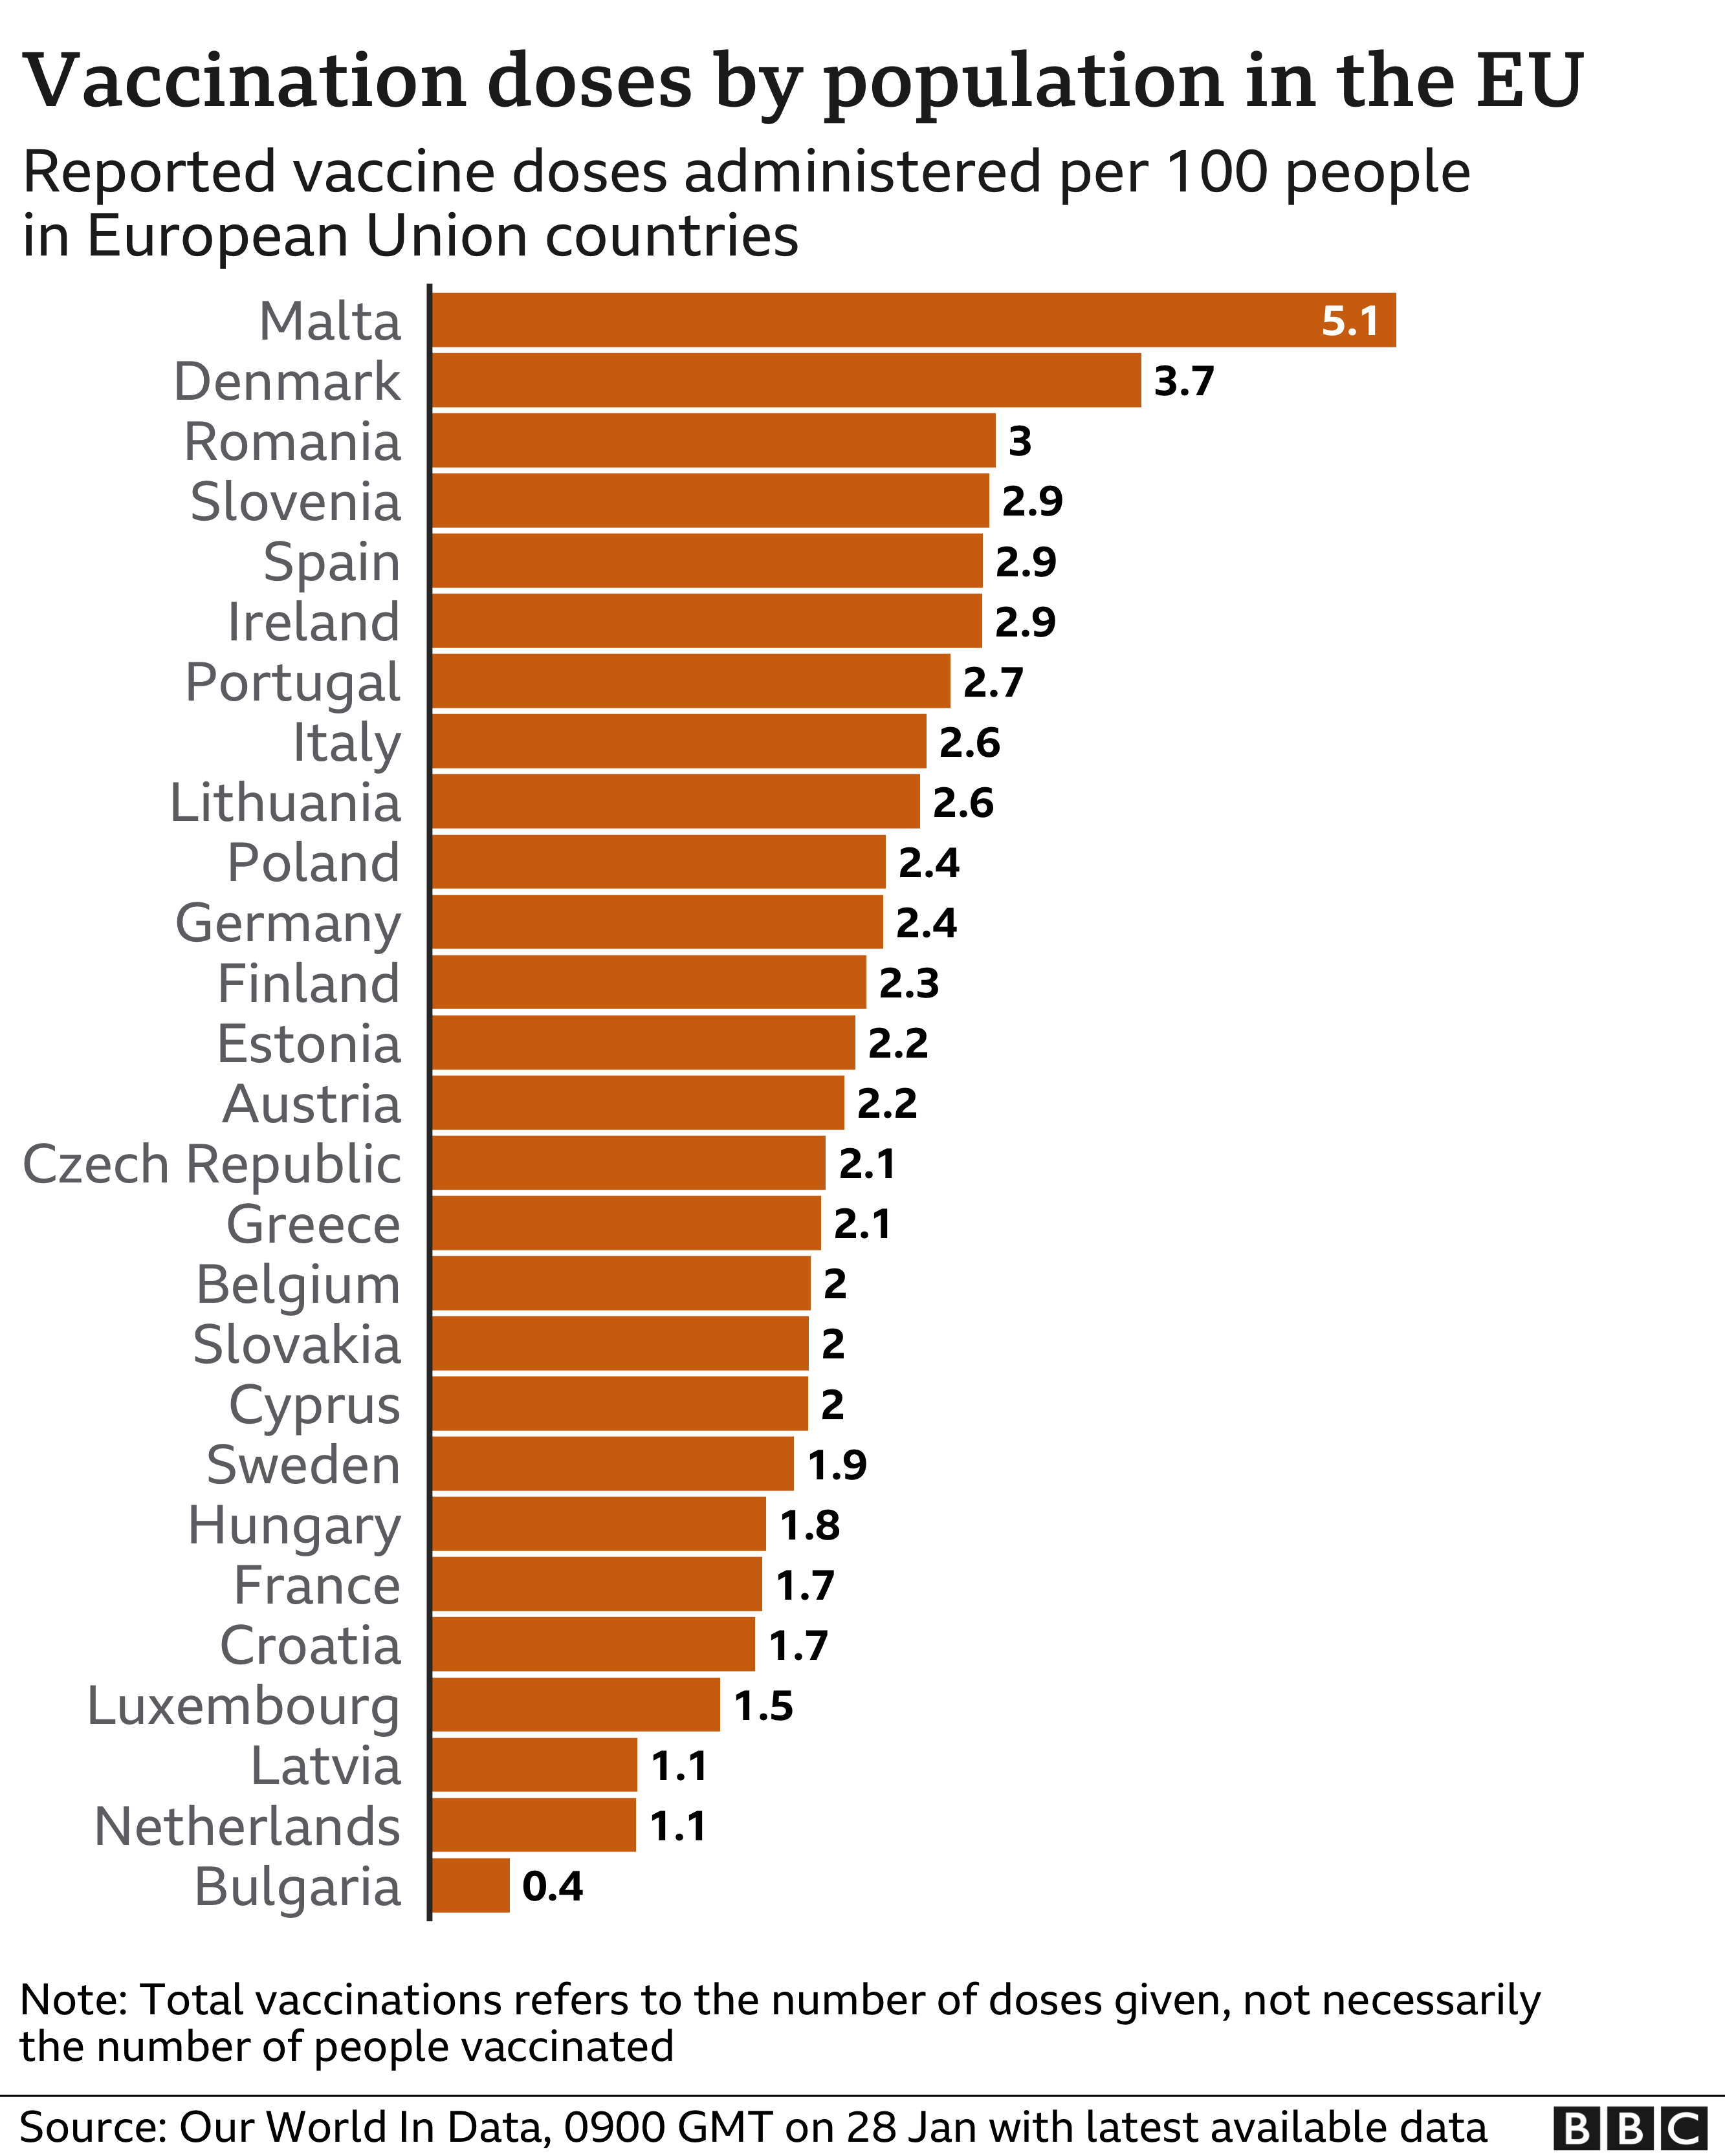 Image shows vaccine doses by population in the EU